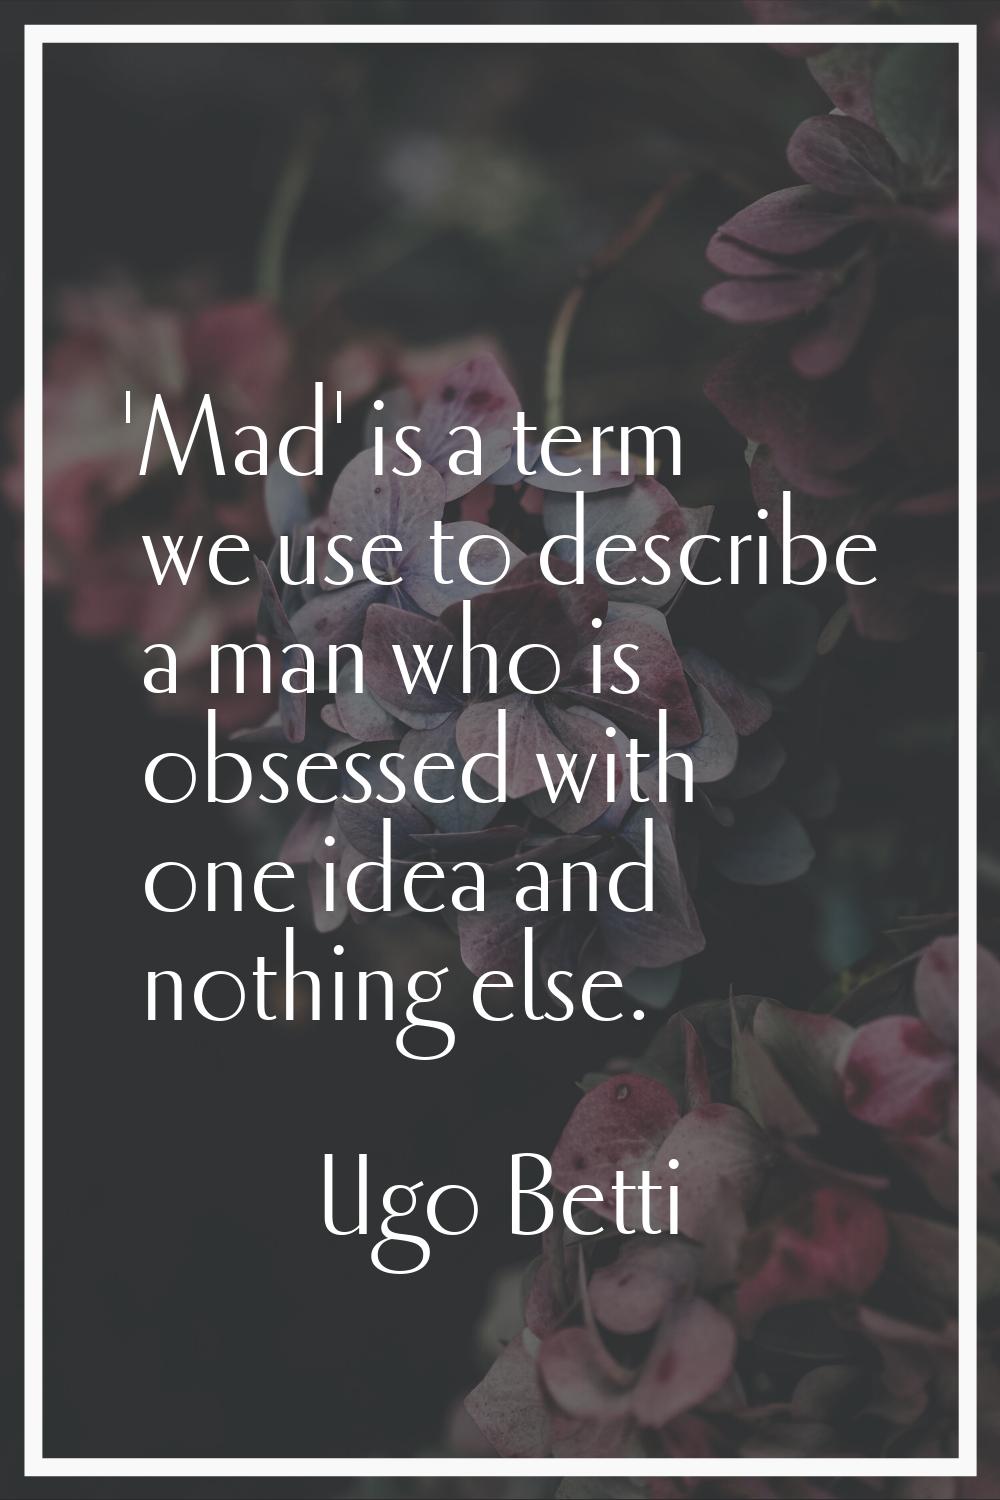 'Mad' is a term we use to describe a man who is obsessed with one idea and nothing else.